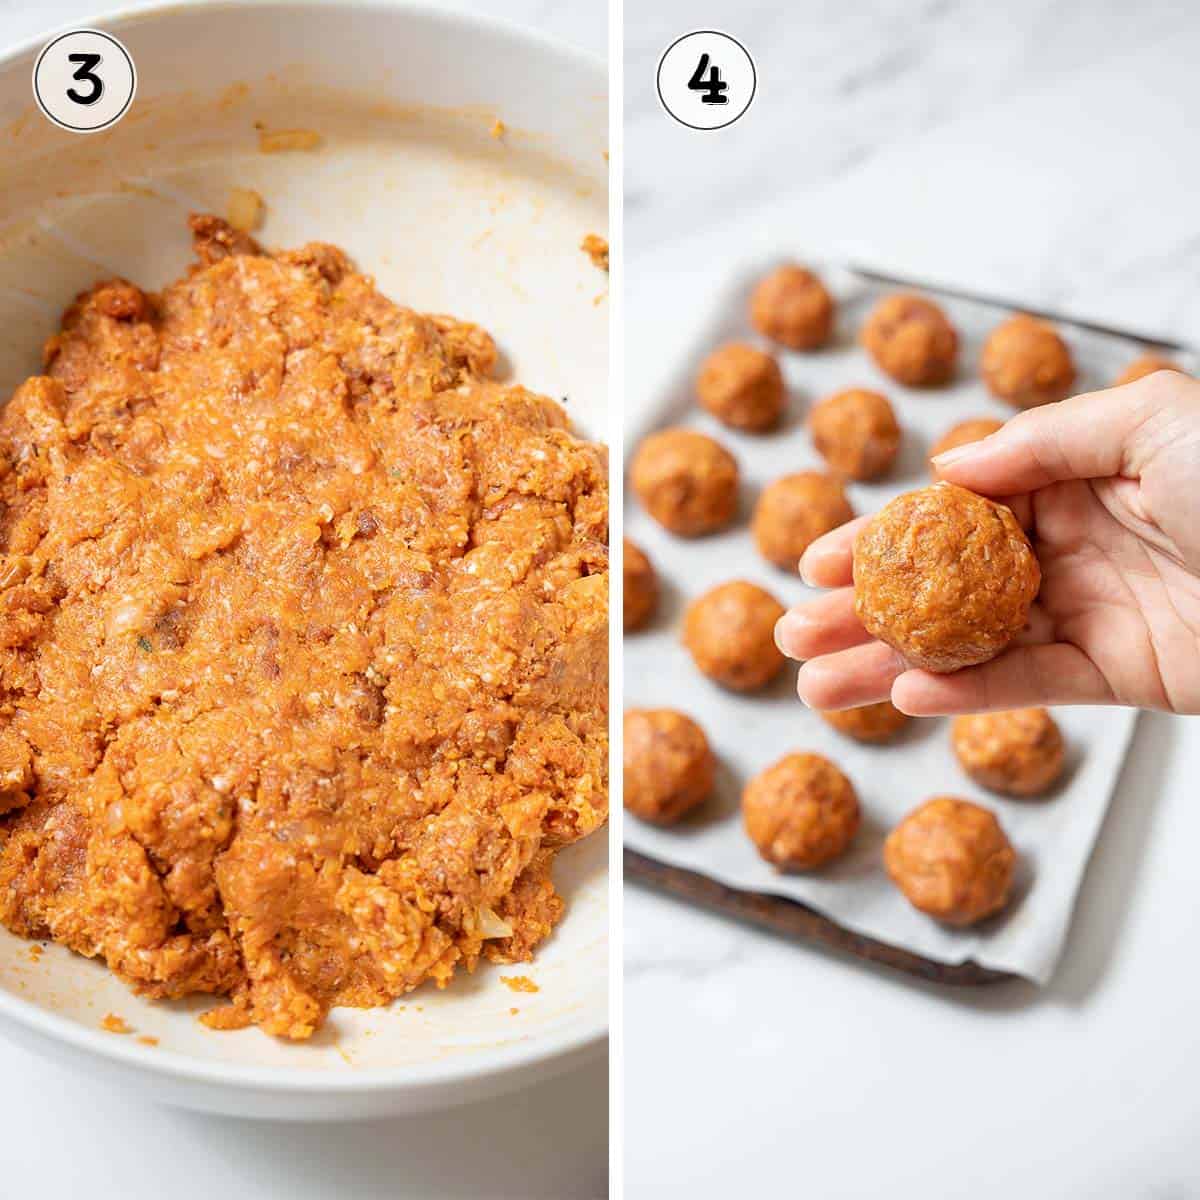 rolling the meatball mixture into balls.